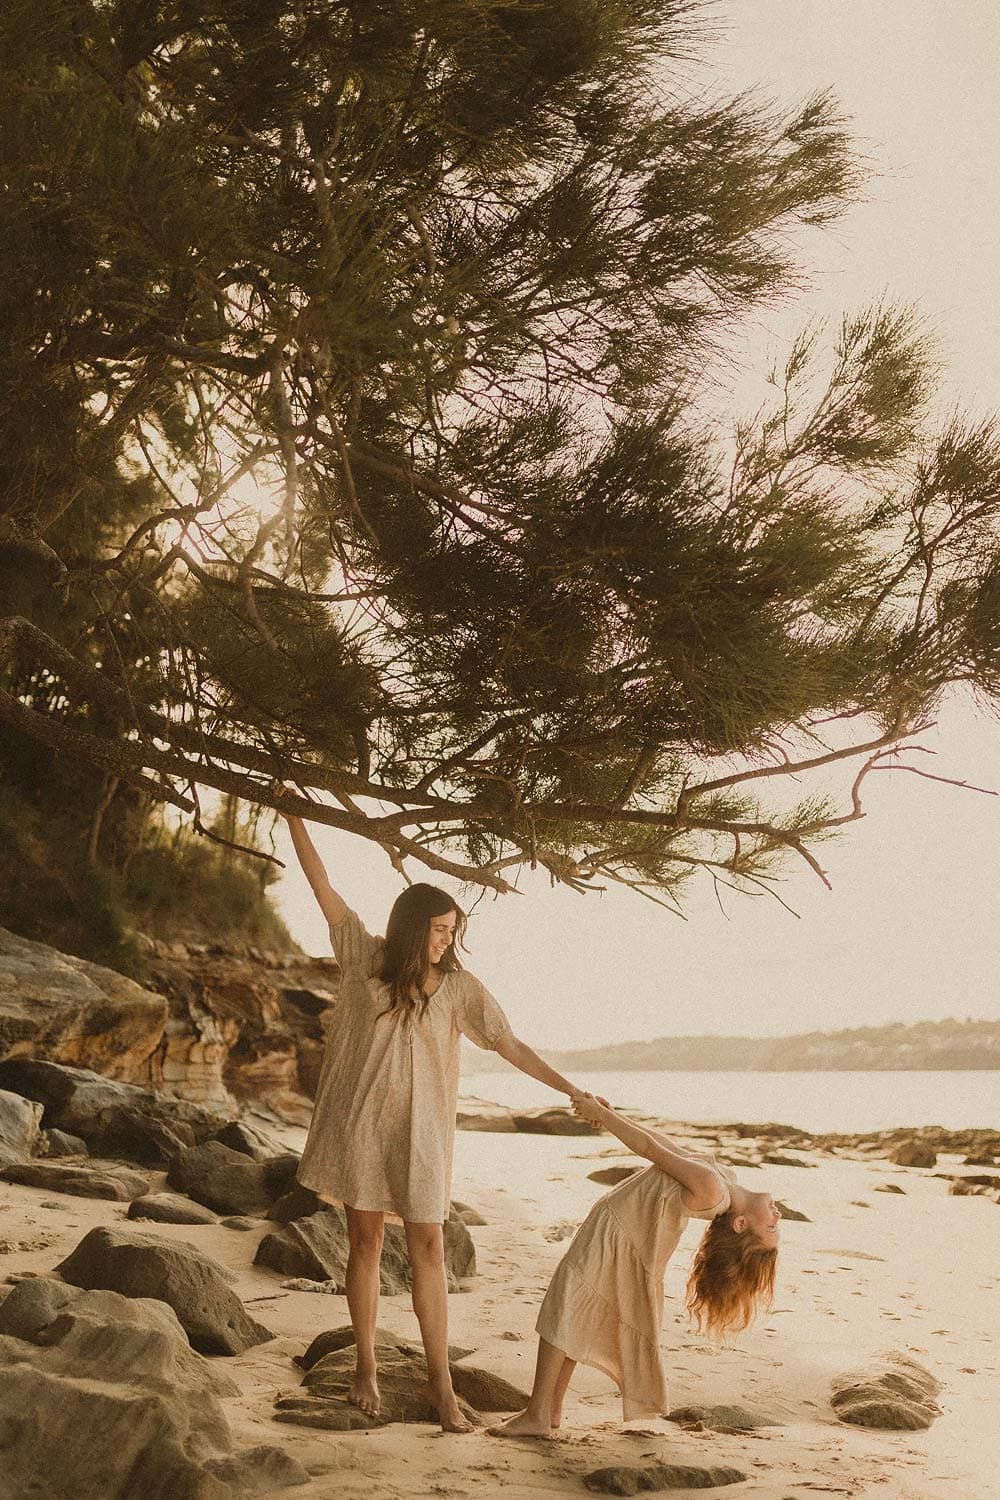 Lifestyle-Family-photographer-sutherland-shire-mum-holds-onto-tree-branch-that-overhangs-the-beach-and-rocks-whilst-holding-onto-hand-of-girl-who-playfully-leans-back-with-hair-free-flowing